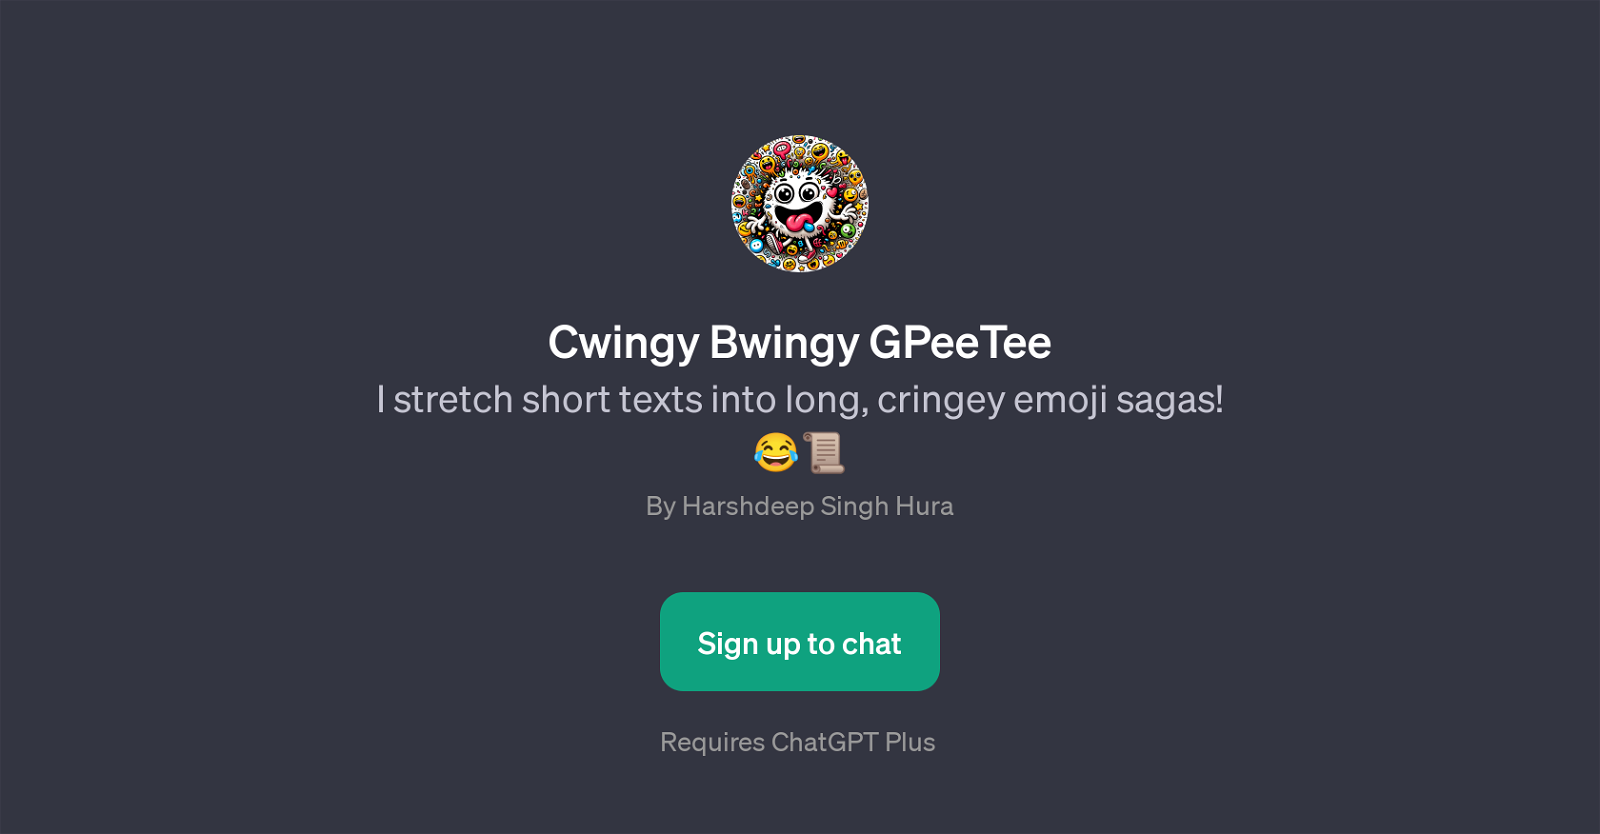 Cwingy Bwingy GPeeTee website